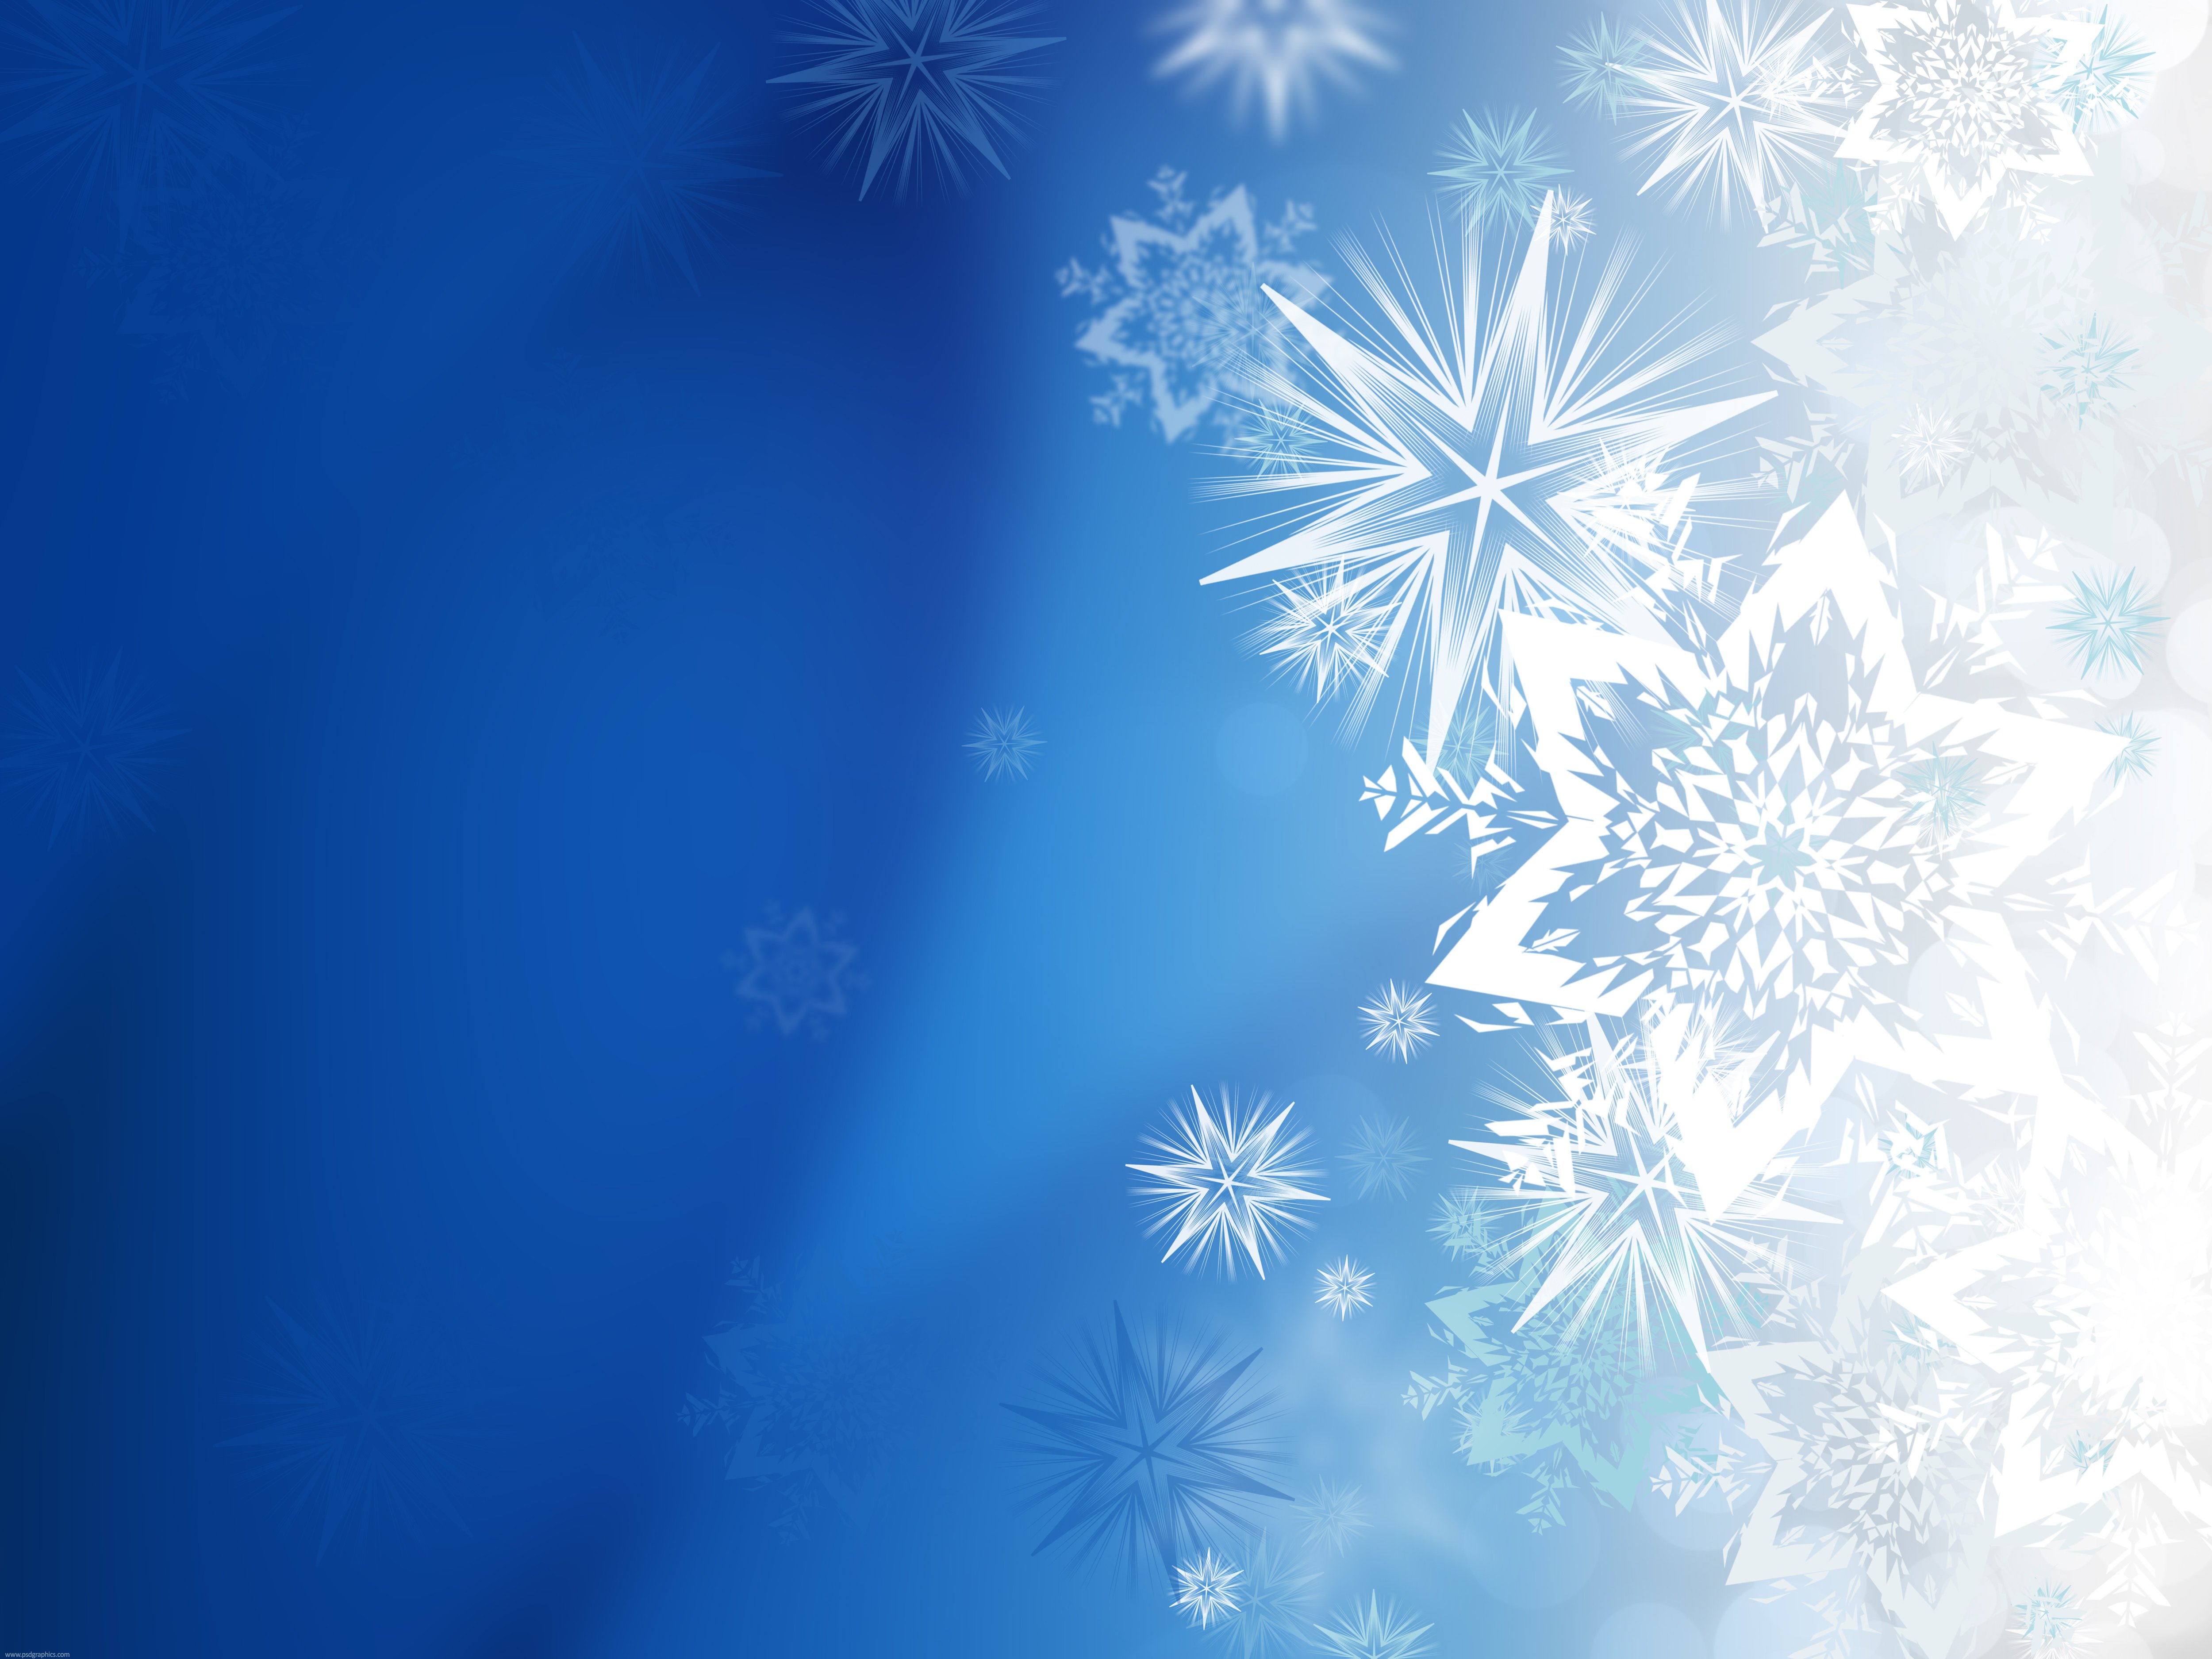  background xmas snowflakes background abstract winter design grungy